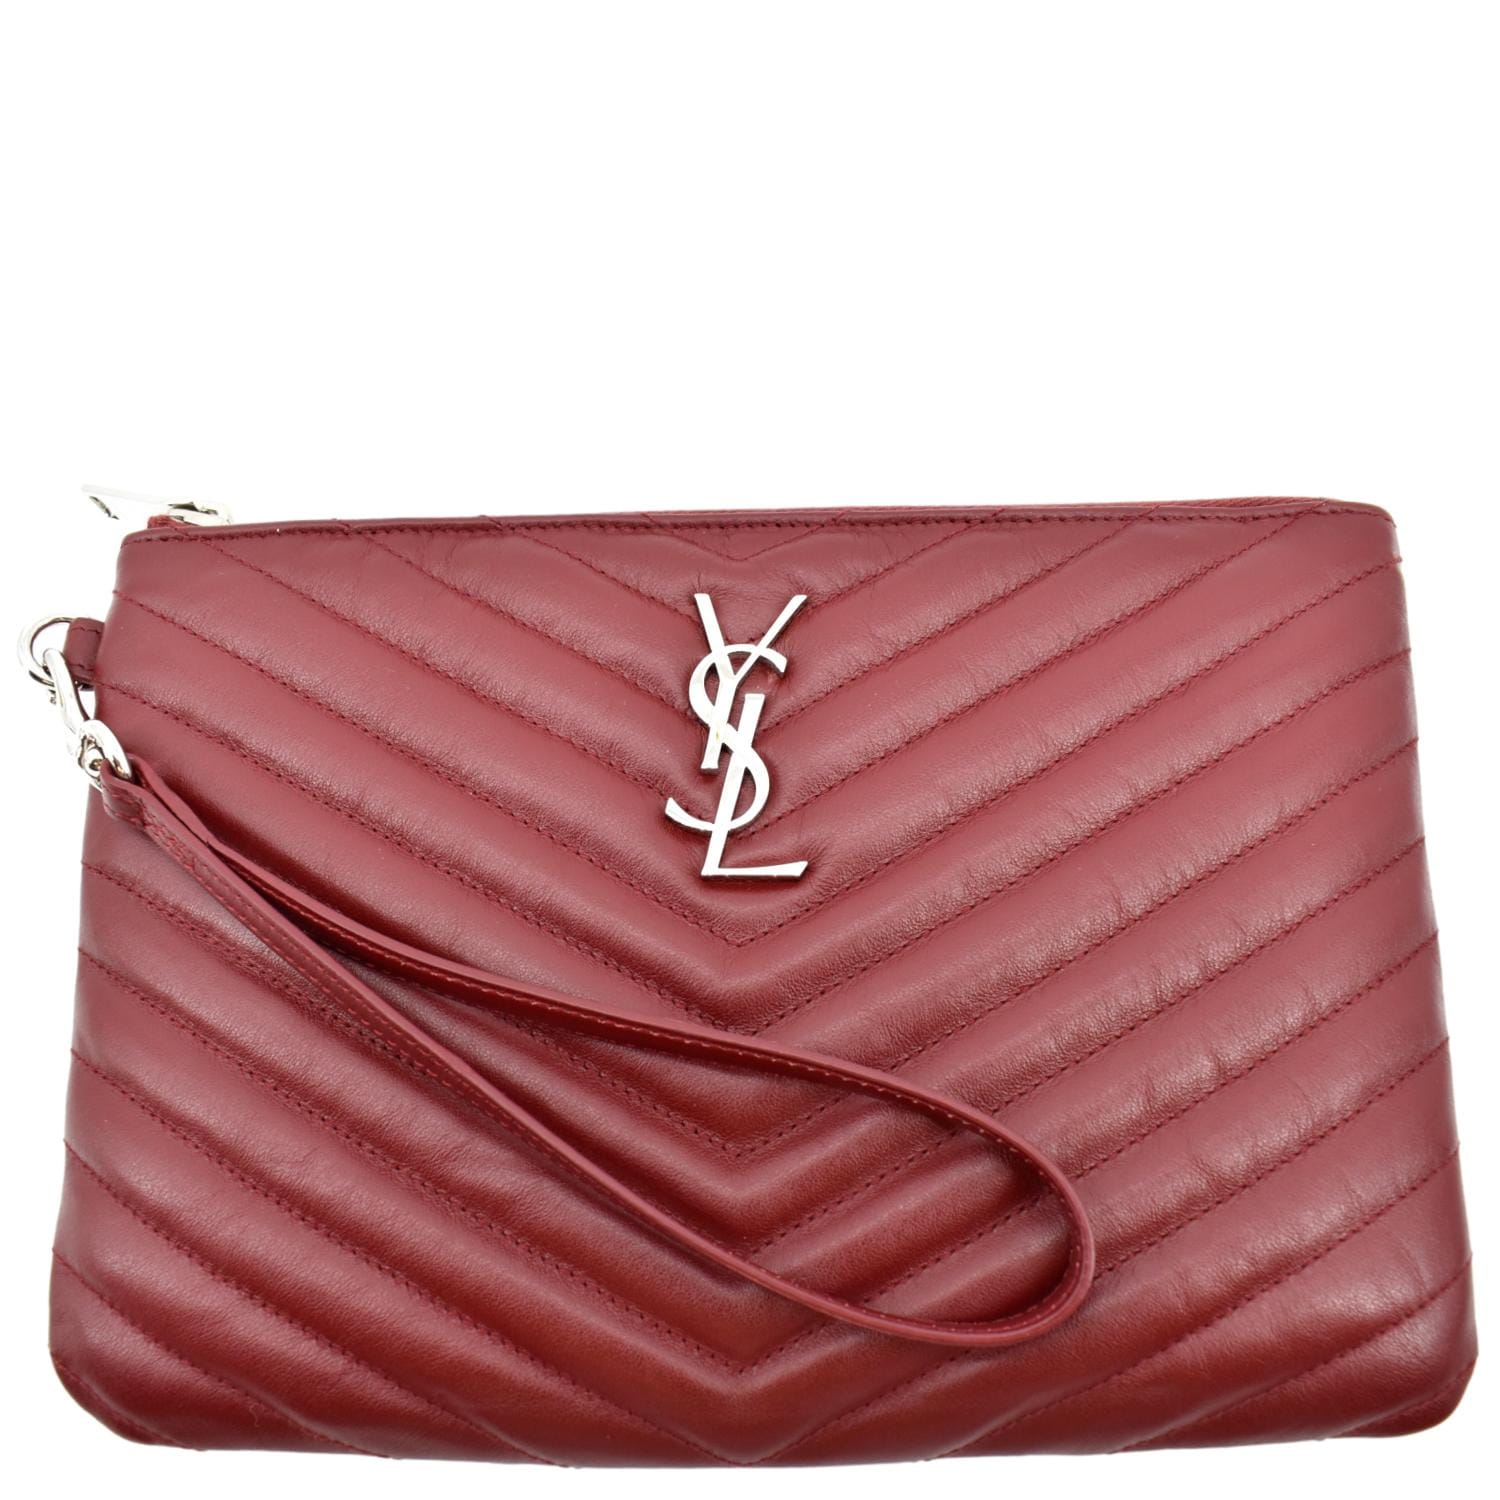 Monogram quilted leather pouch